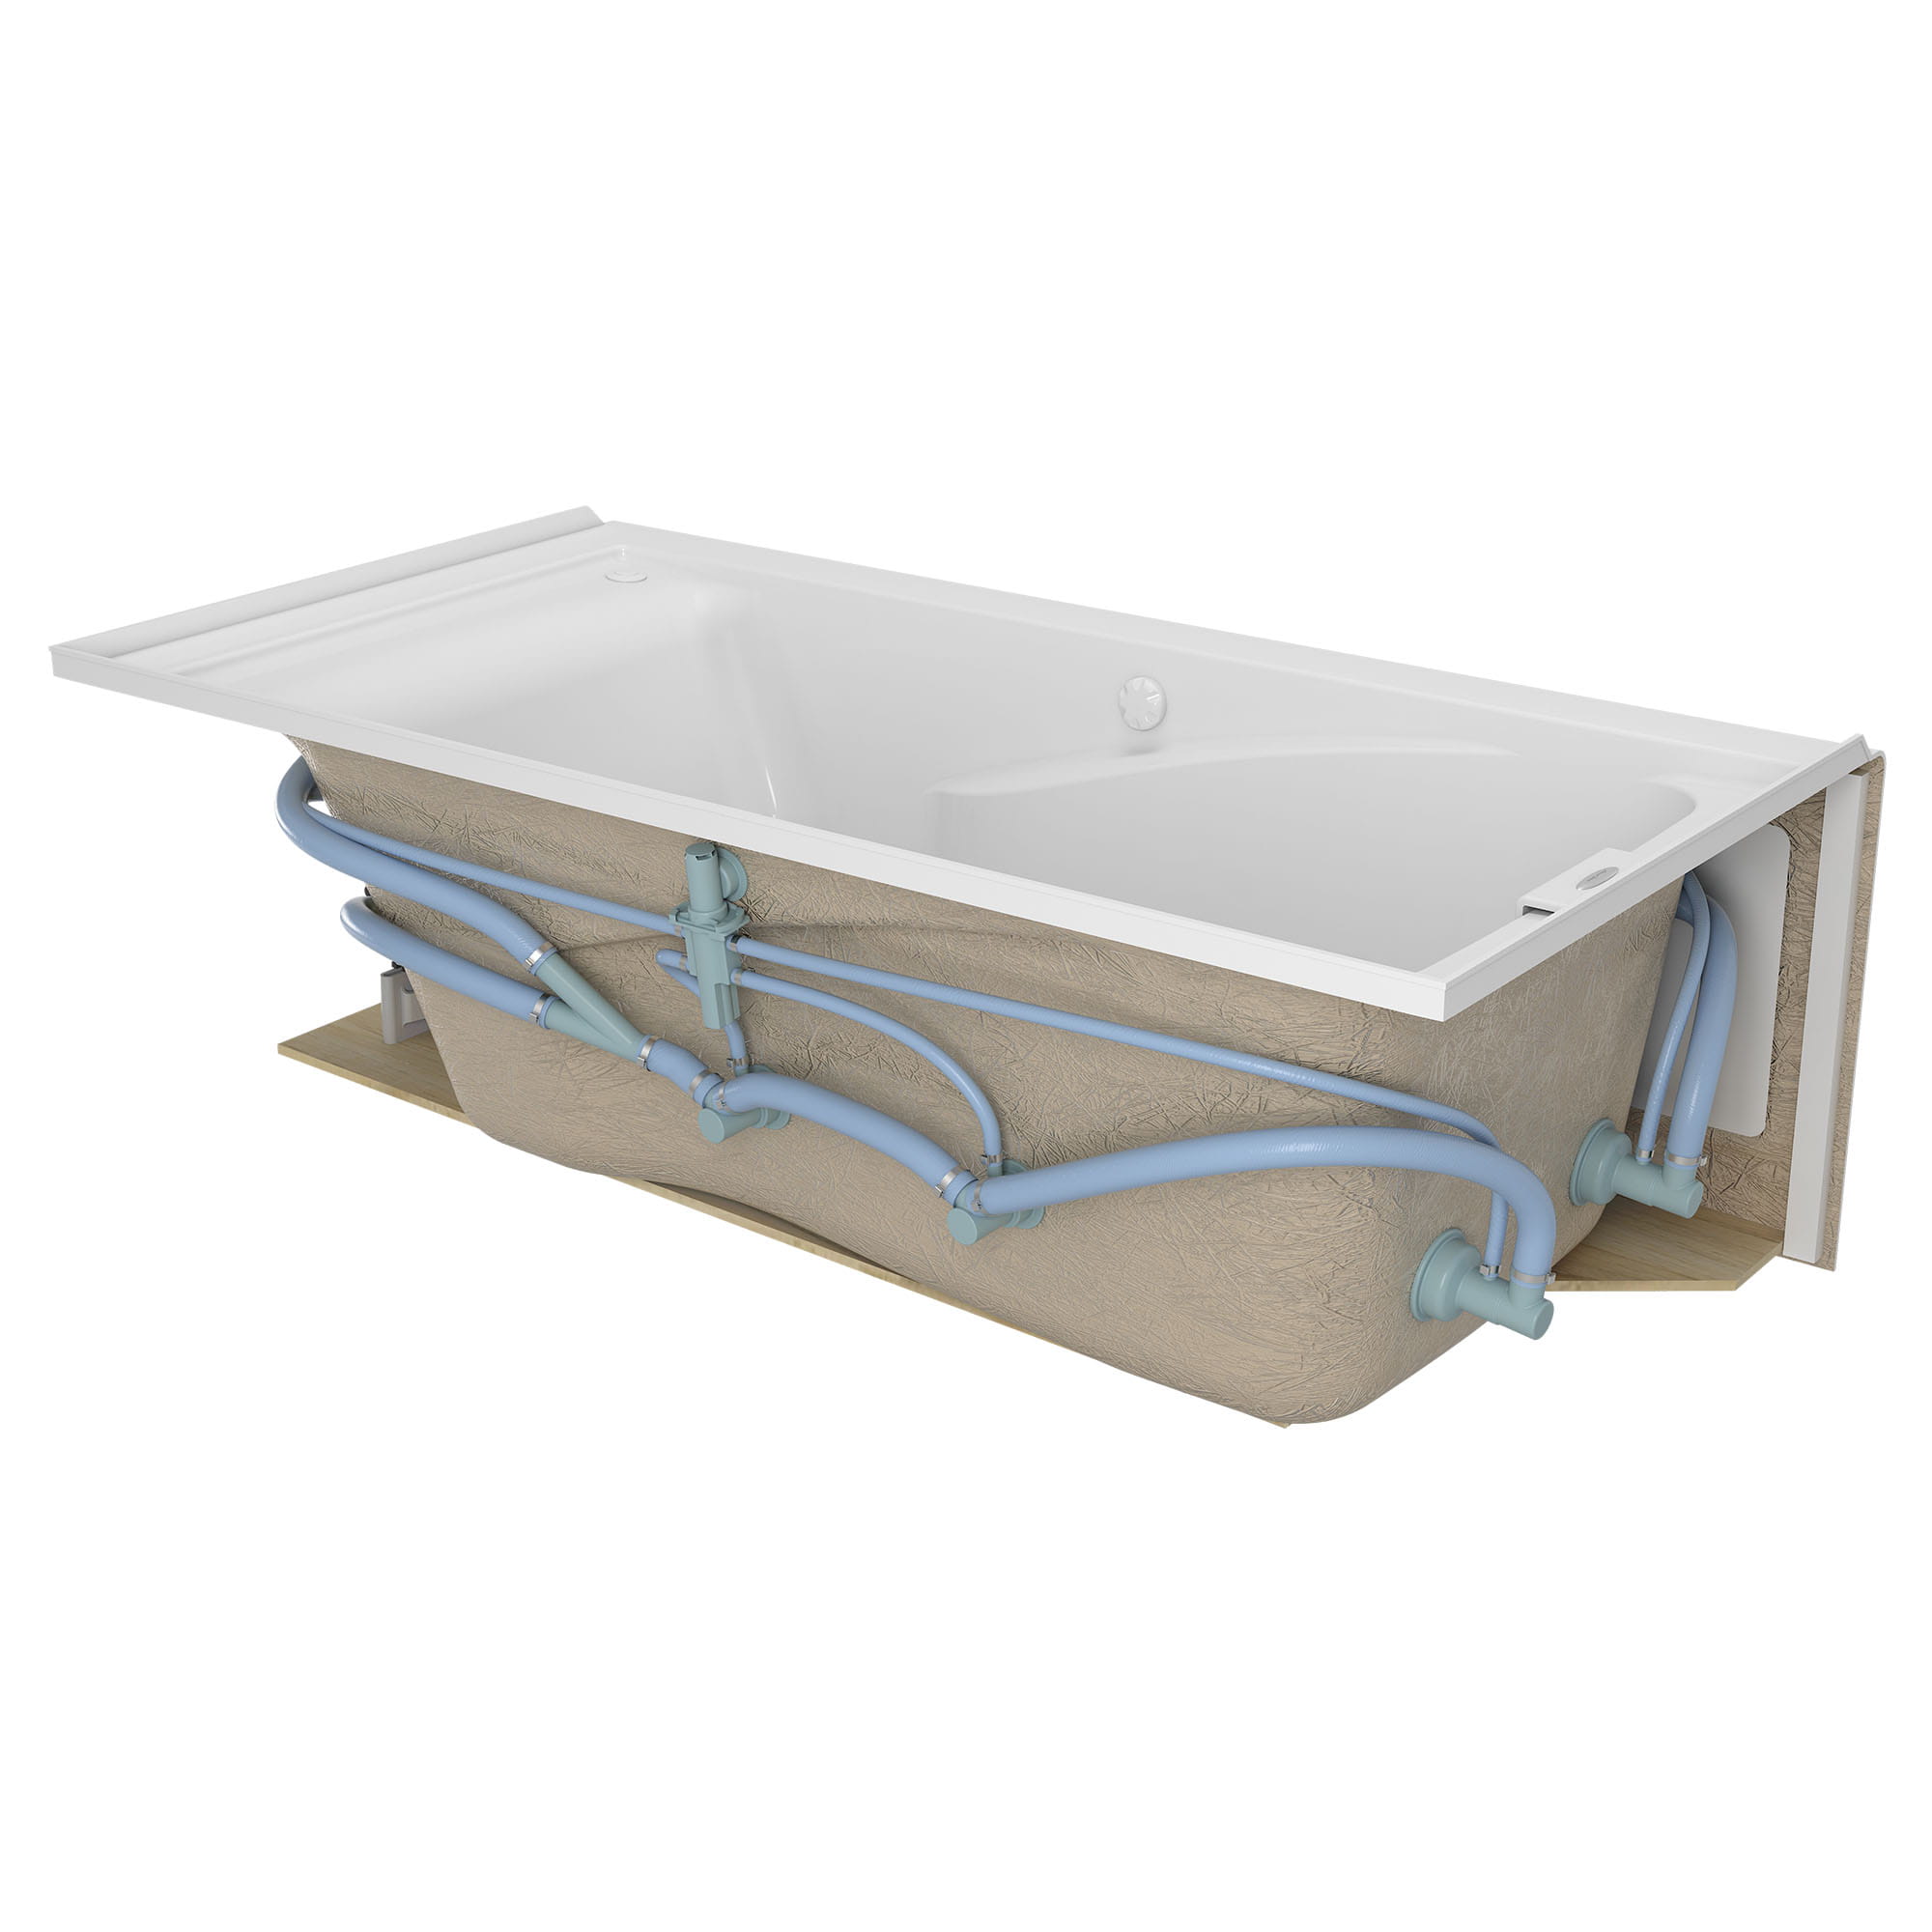 Mainstream 60in x 32in 8-Jet Whirlpool Tub with Left-Hand Drain